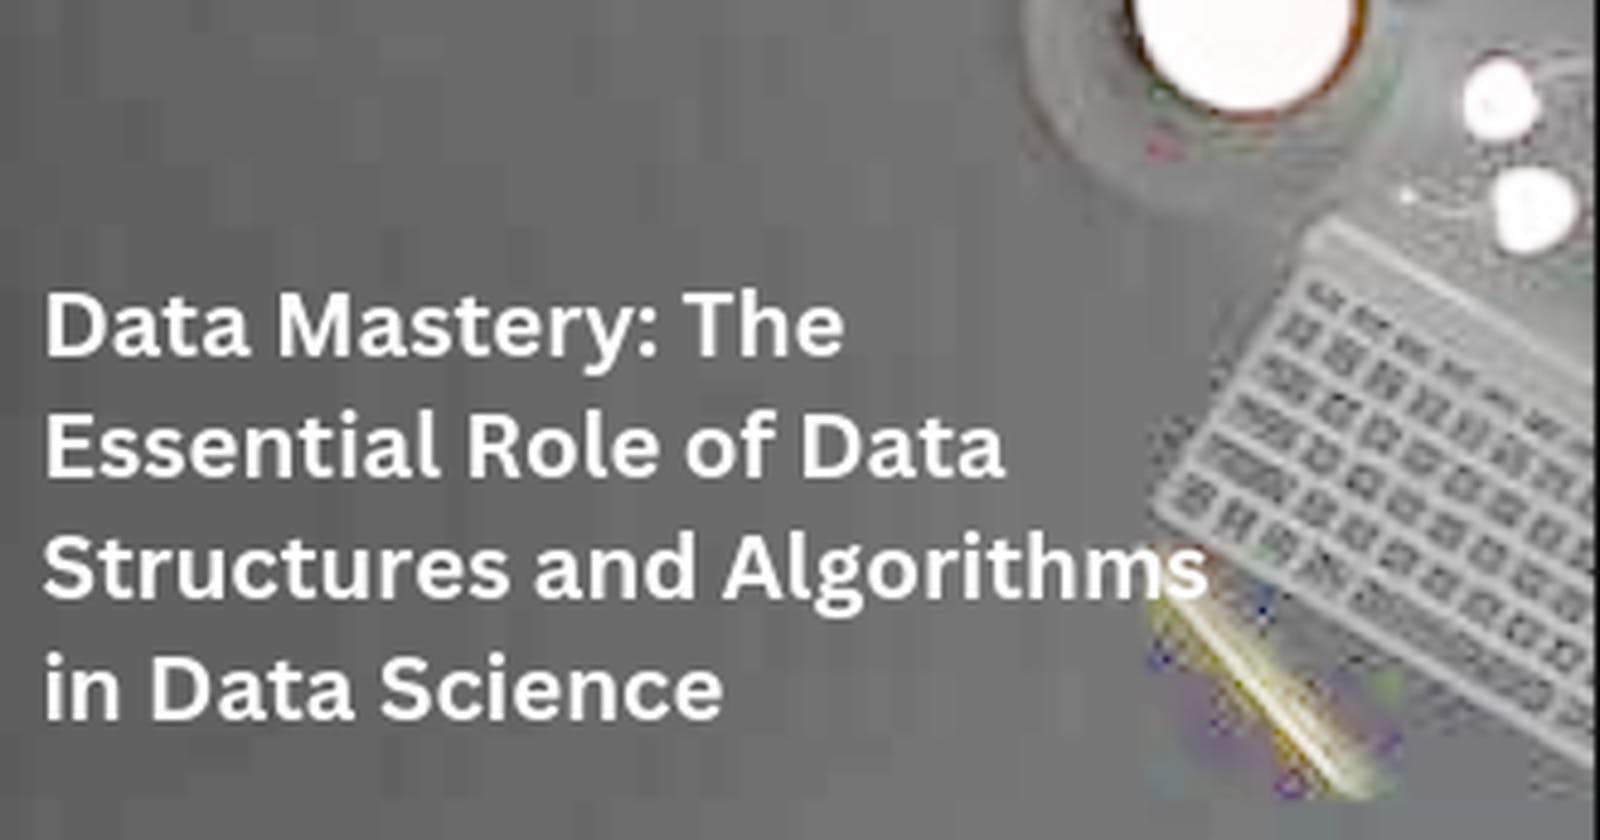 Data Mastery: The Essential Role of Data Structures and Algorithms in Data Science